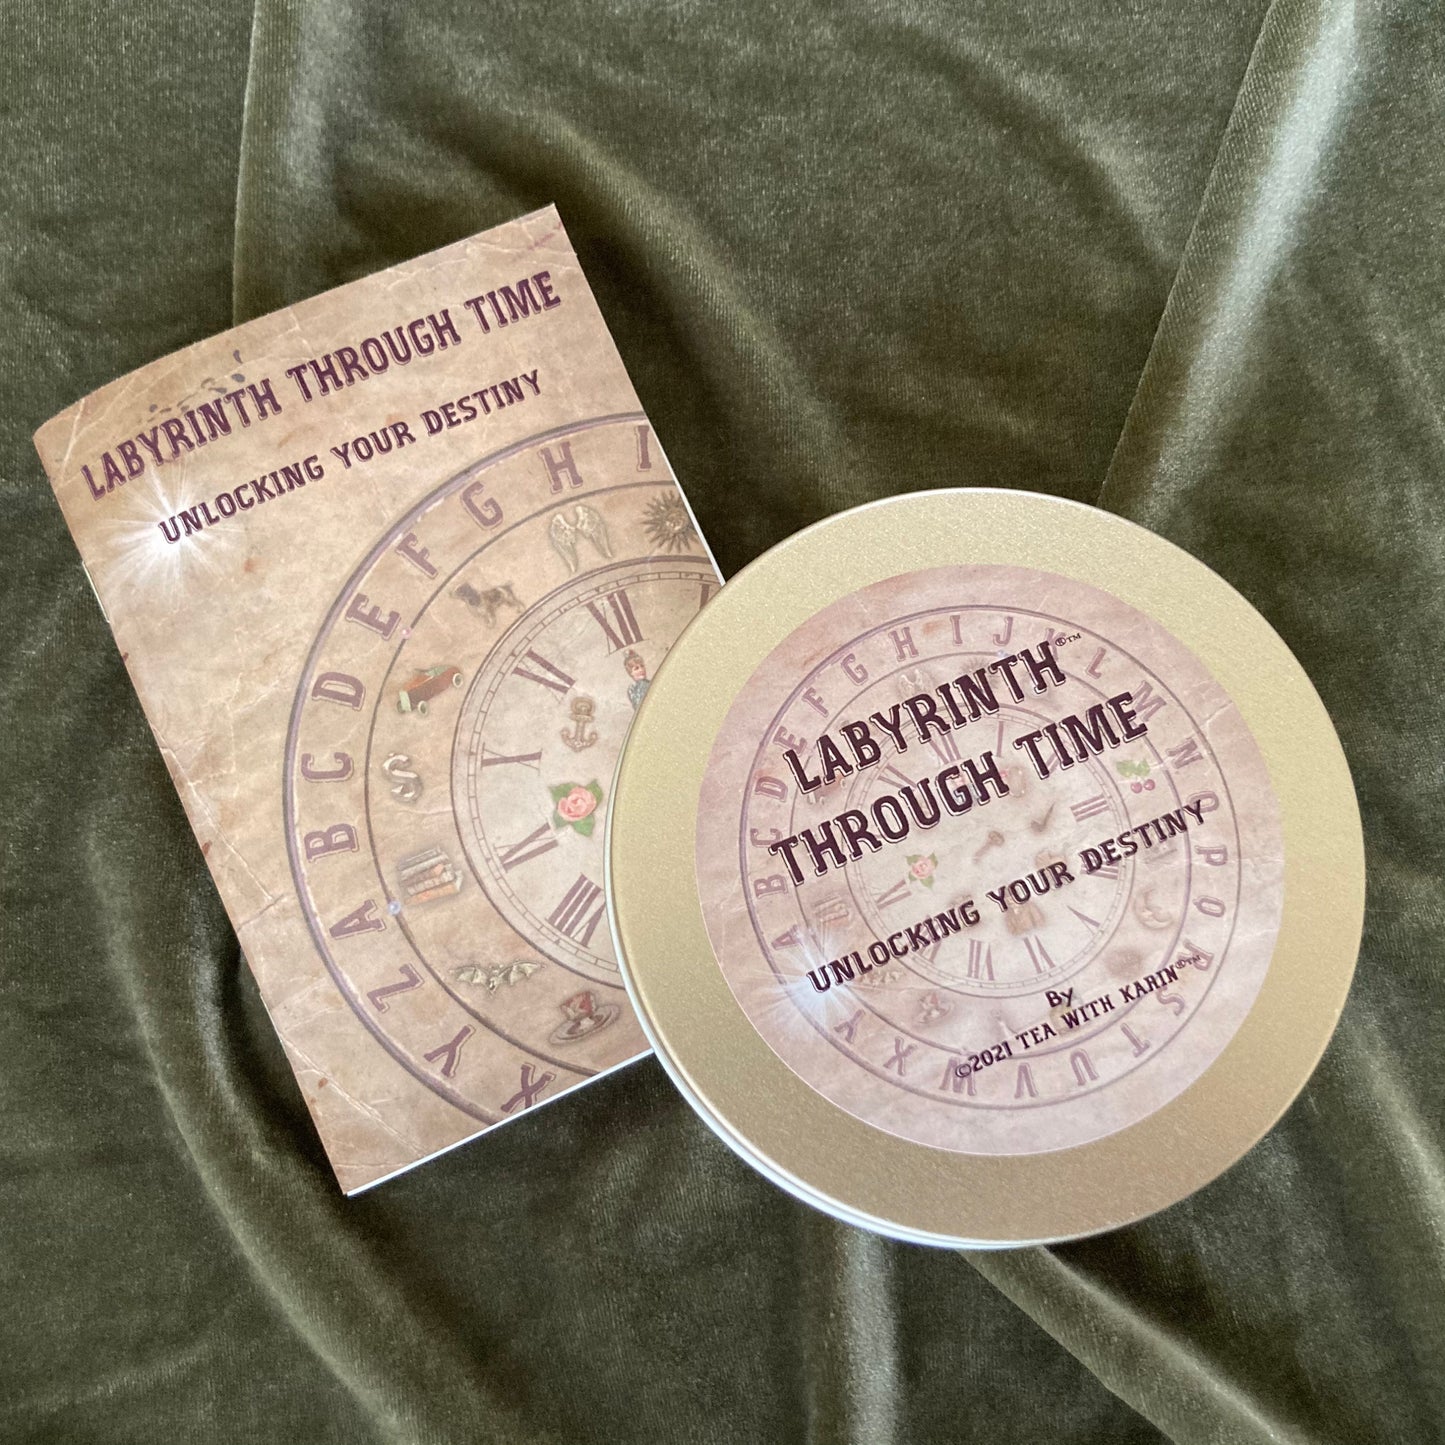 6 Divination tools in one kit. Labyrinth Through Time is a creative idea of Karin Dalton-Smith or Tea With Karin in Melbourne, Australia.It has cards, charms, doc, pendulum and comes with an online video course. Unlock your destiny.